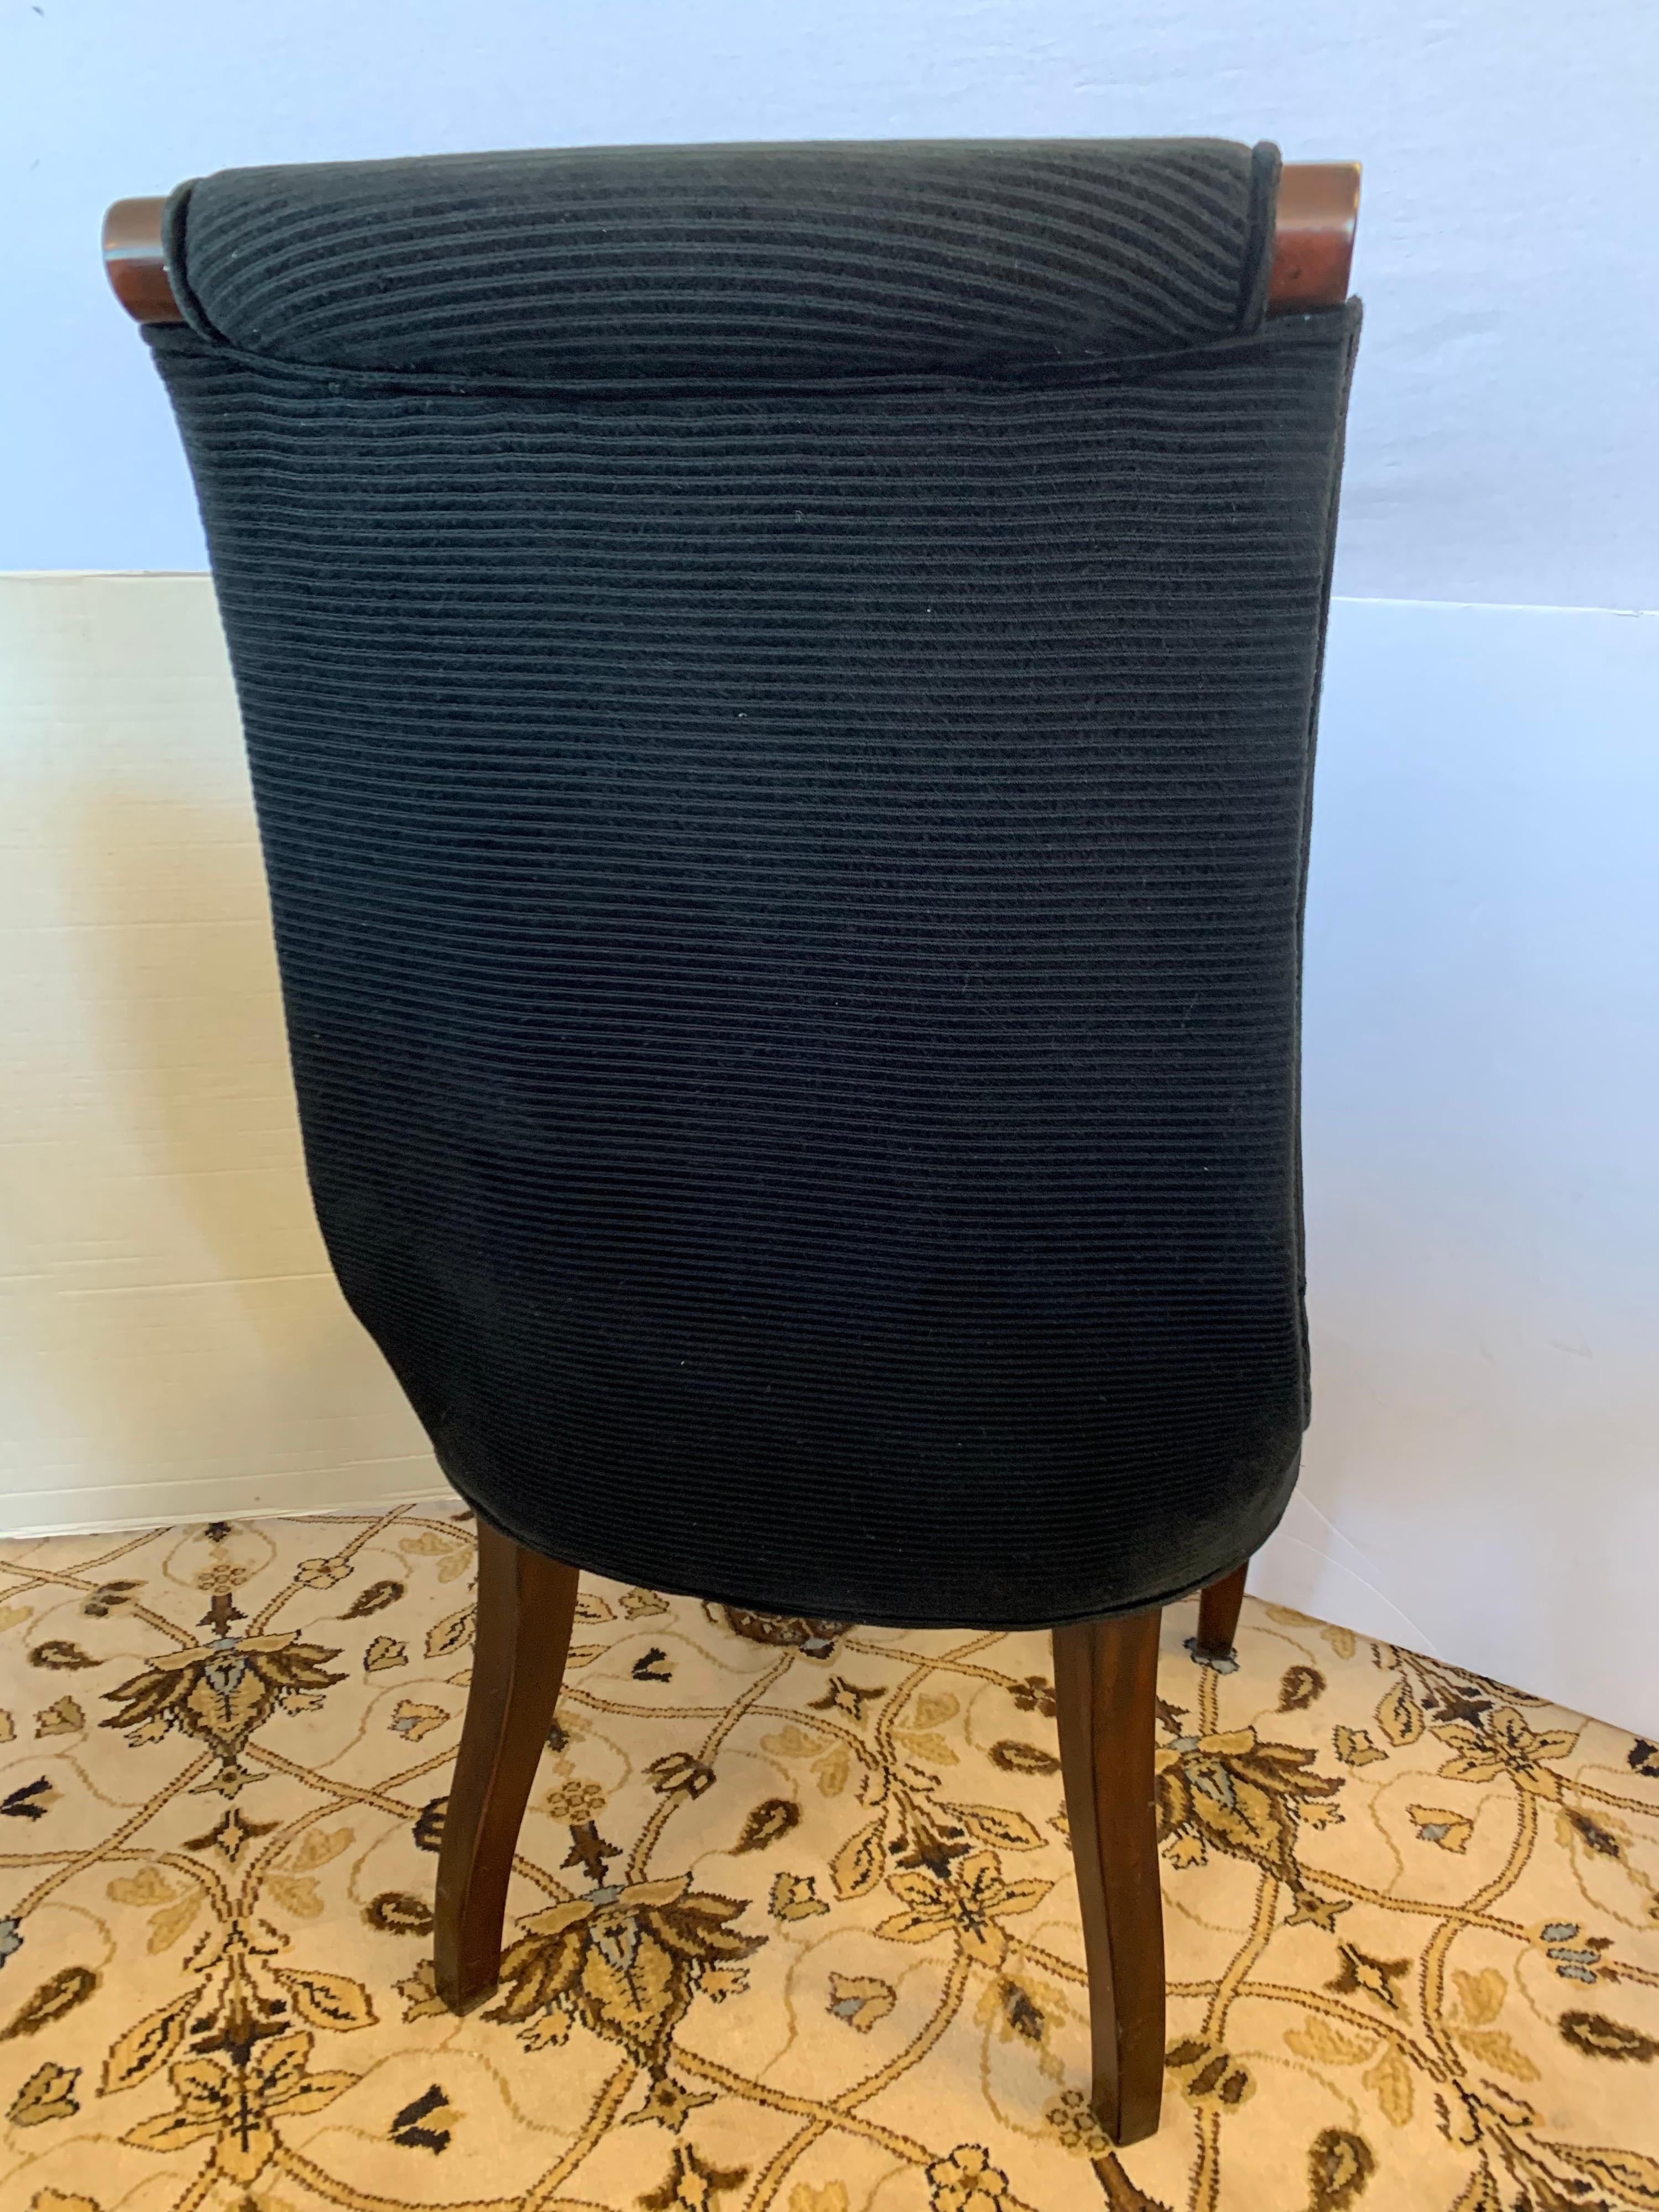 Magnificent set of ten Henredon dining chairs done in mahogany wood and a luxurious
black velvet fabric that has subtle pinstripes running horizontally. All vendor hallmarks are at bottom
and these chairs originally retailed at 1895.00 per chair.